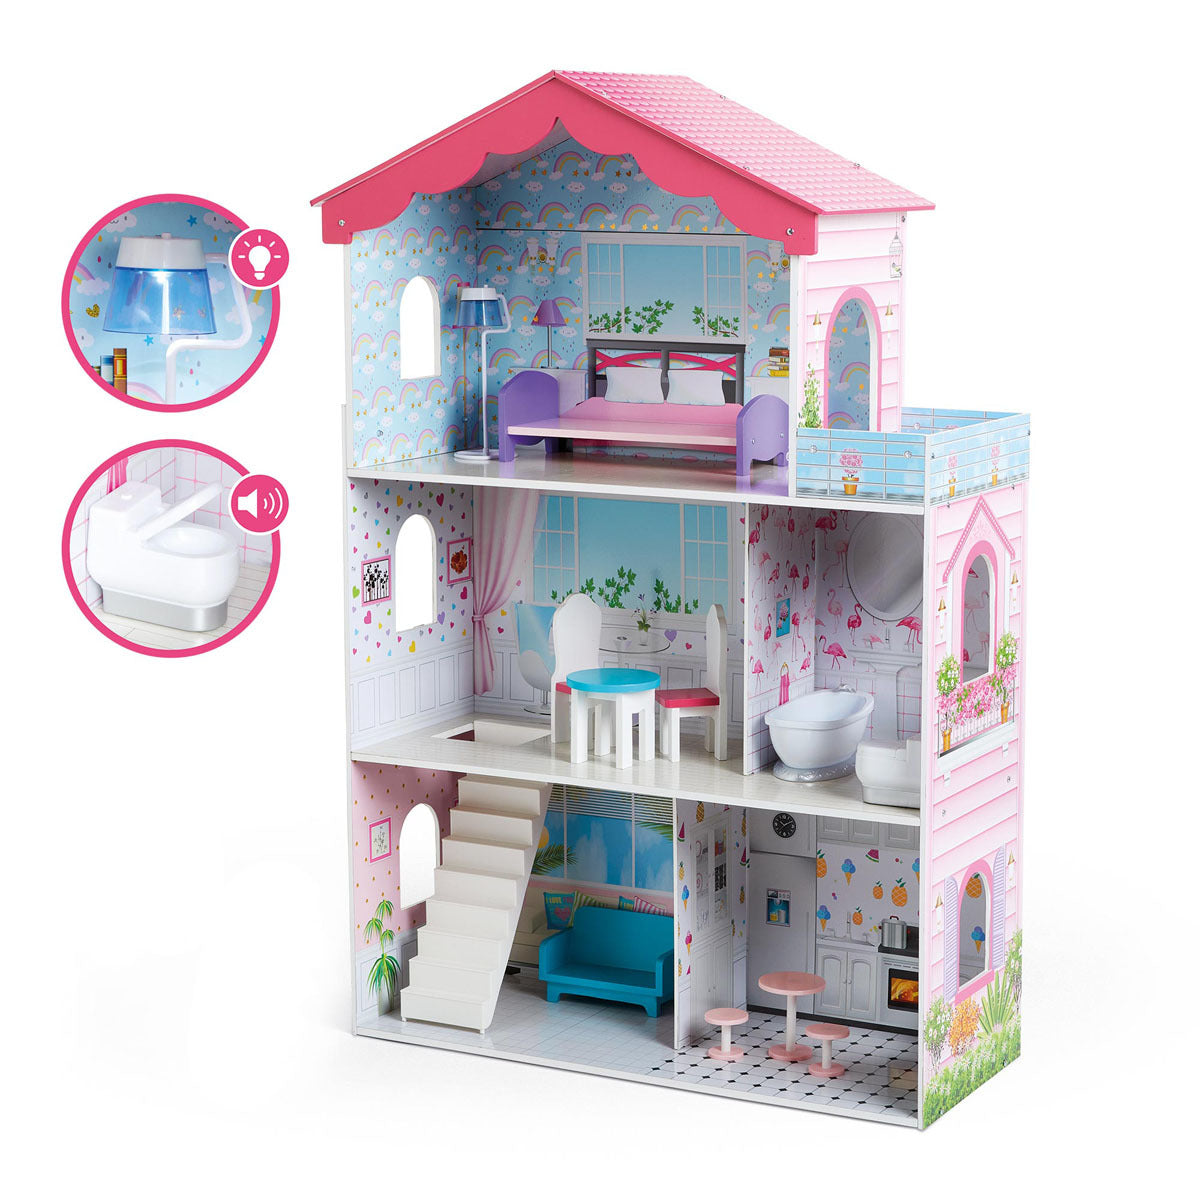 Early Learning Centre Wooden Sparkle Lights Mansion Dolls House